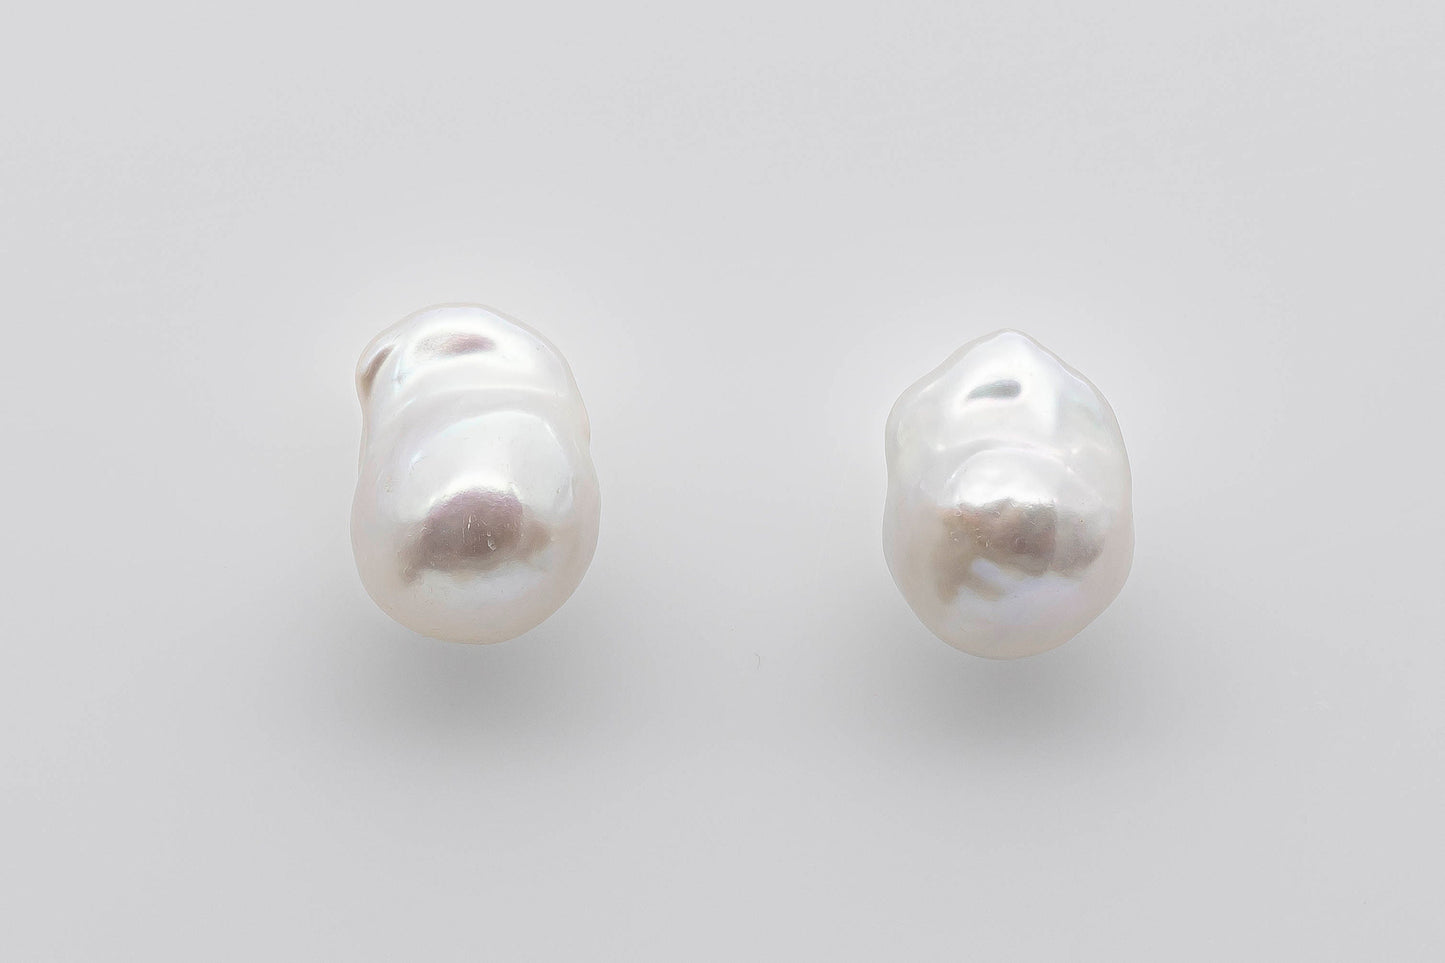 13-14mm Baroque Pearl Undrilled Loose Pair with High Luster and Smooth Both Front and Backside for Making Earring, SKU # 1356BA